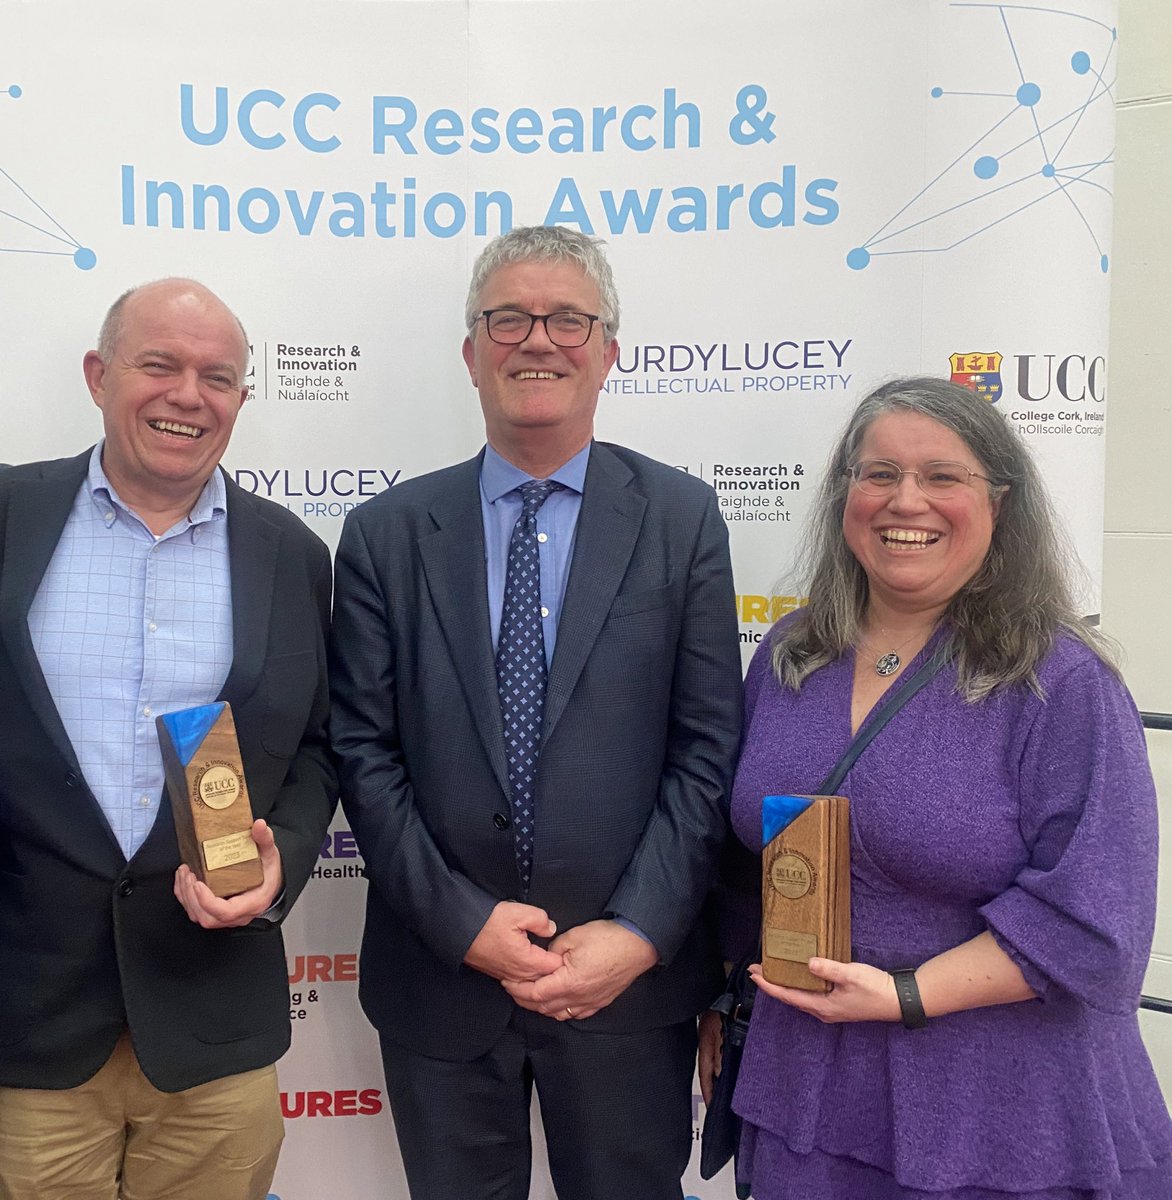 Many colleagues will agree — no one better when facing a tough grant deadline than the formidable dynamic #dreamteam ⭐️ Dr. Sonia Monteiro ⭐️ Kevin Goggins #UCCResearchAwards #kudos